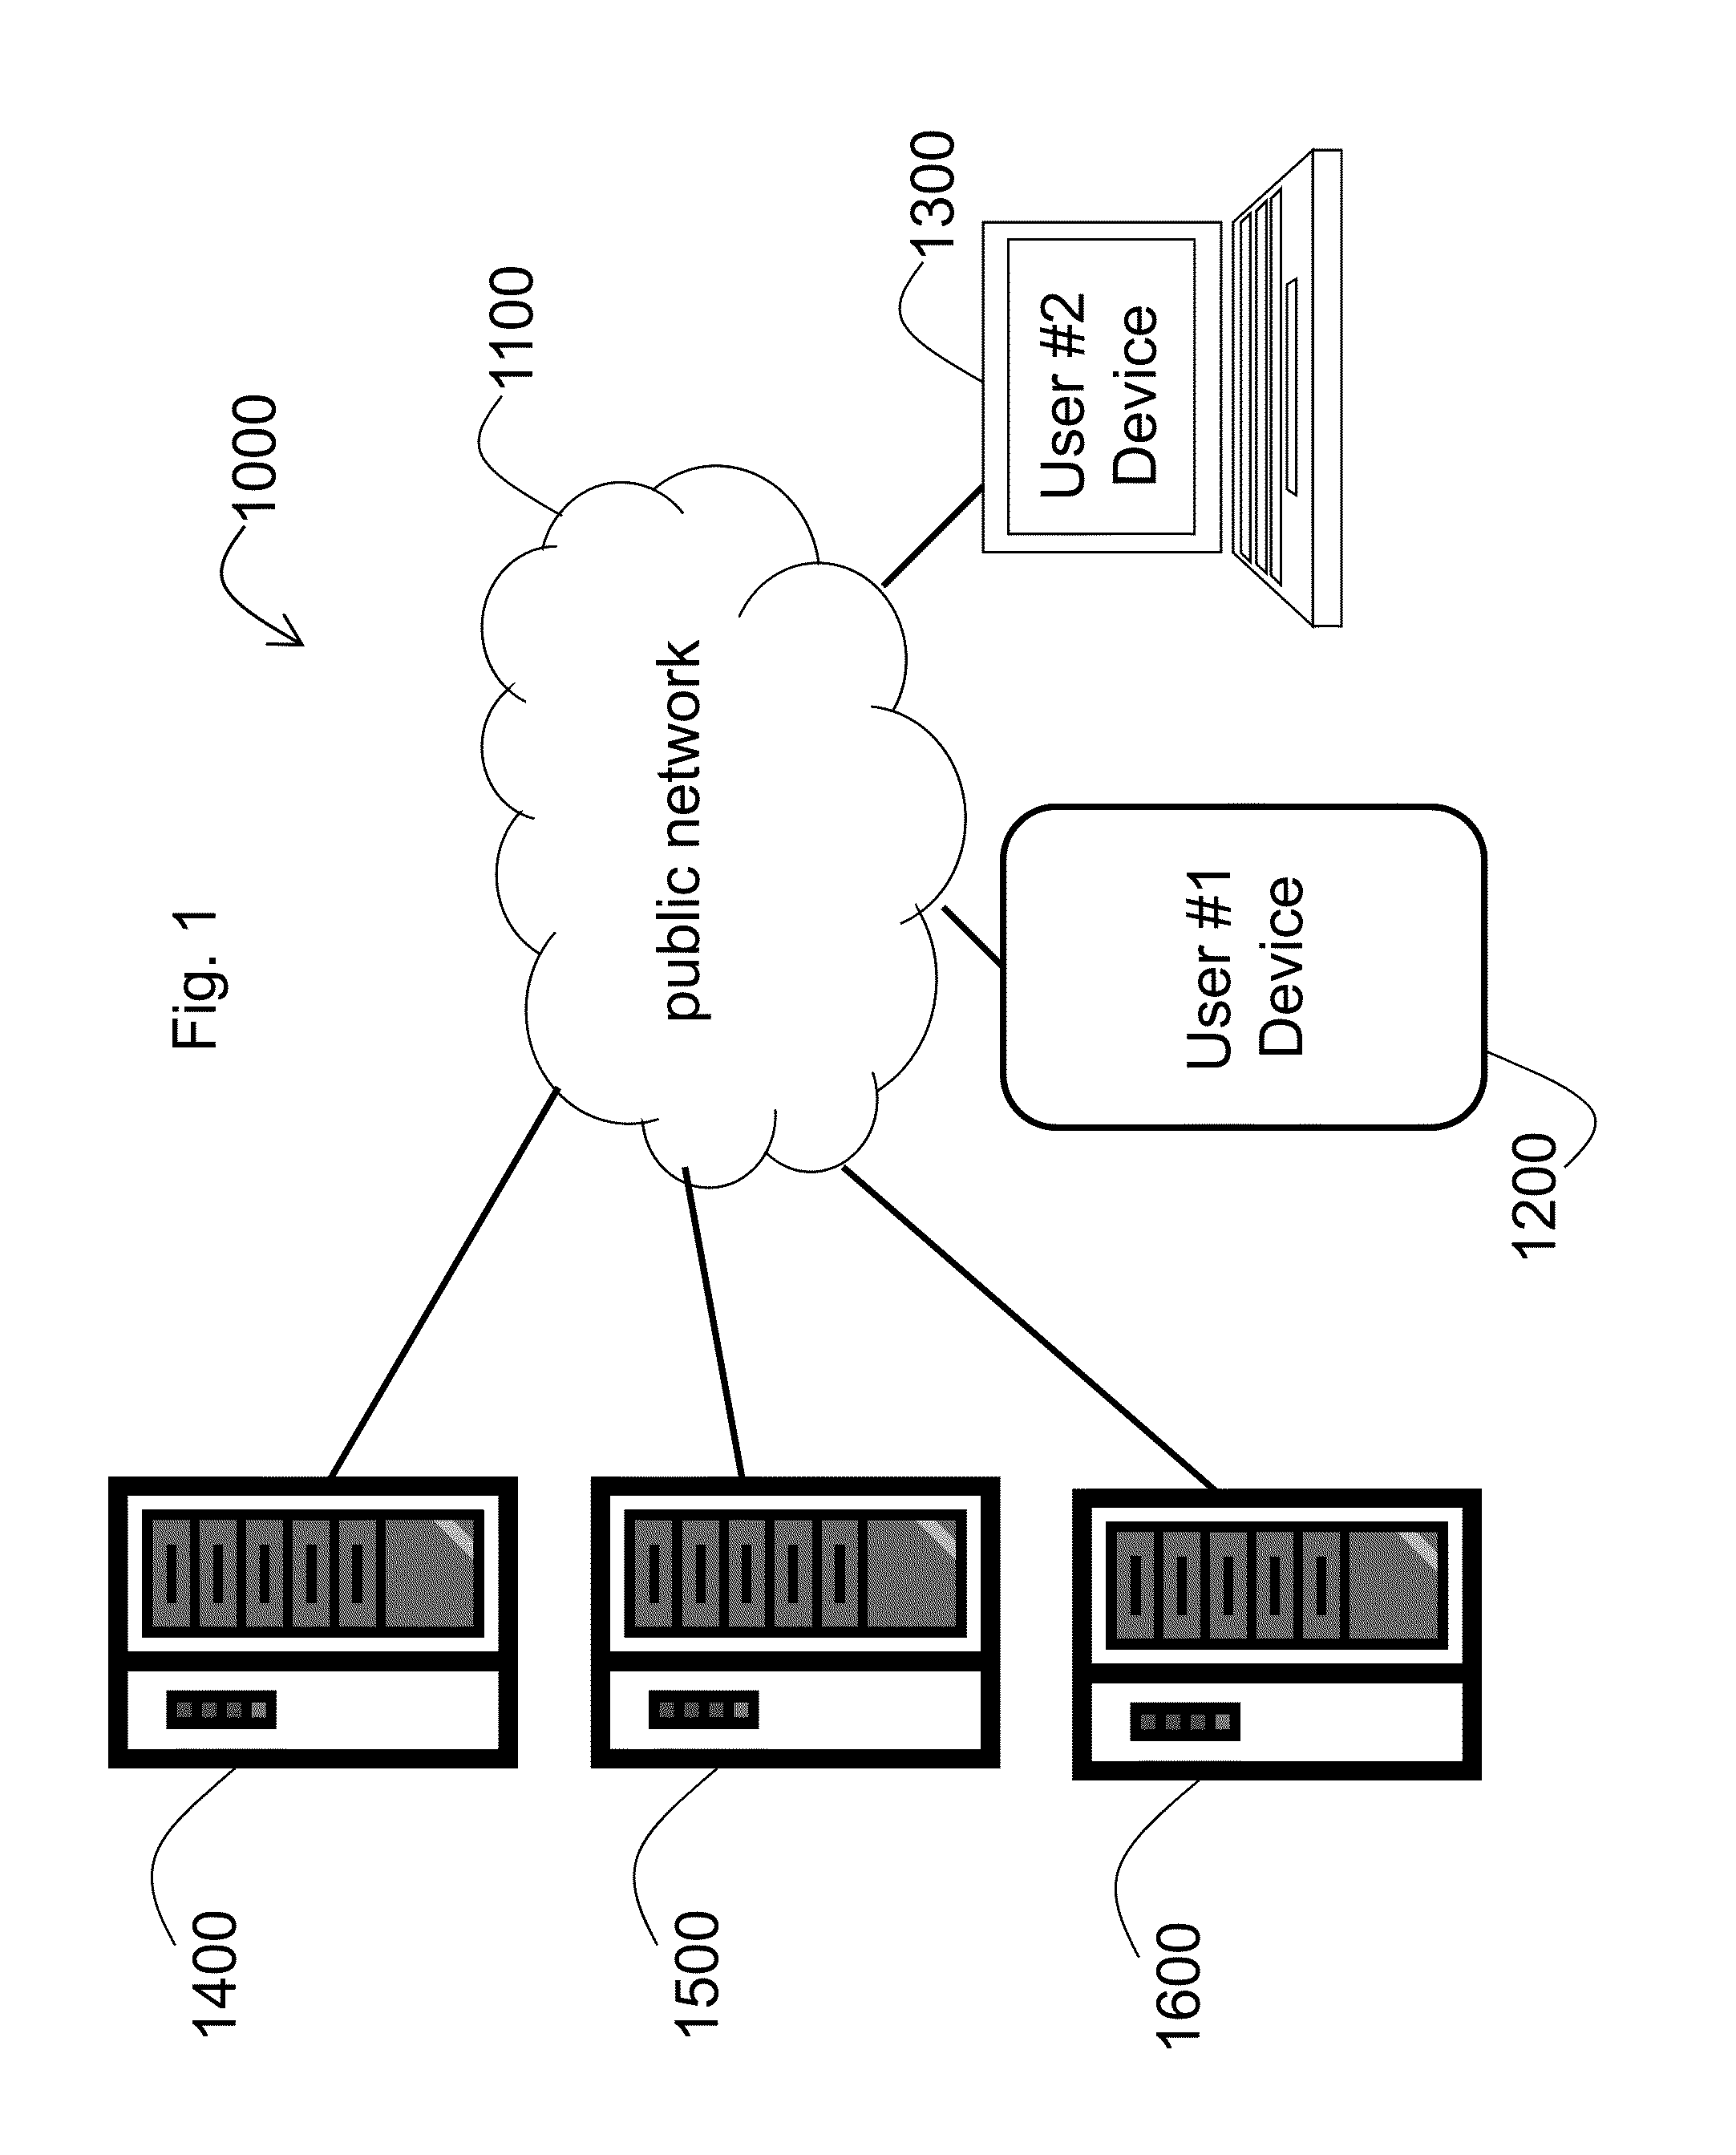 Systems and methods for online learning in a combined game and forum setting